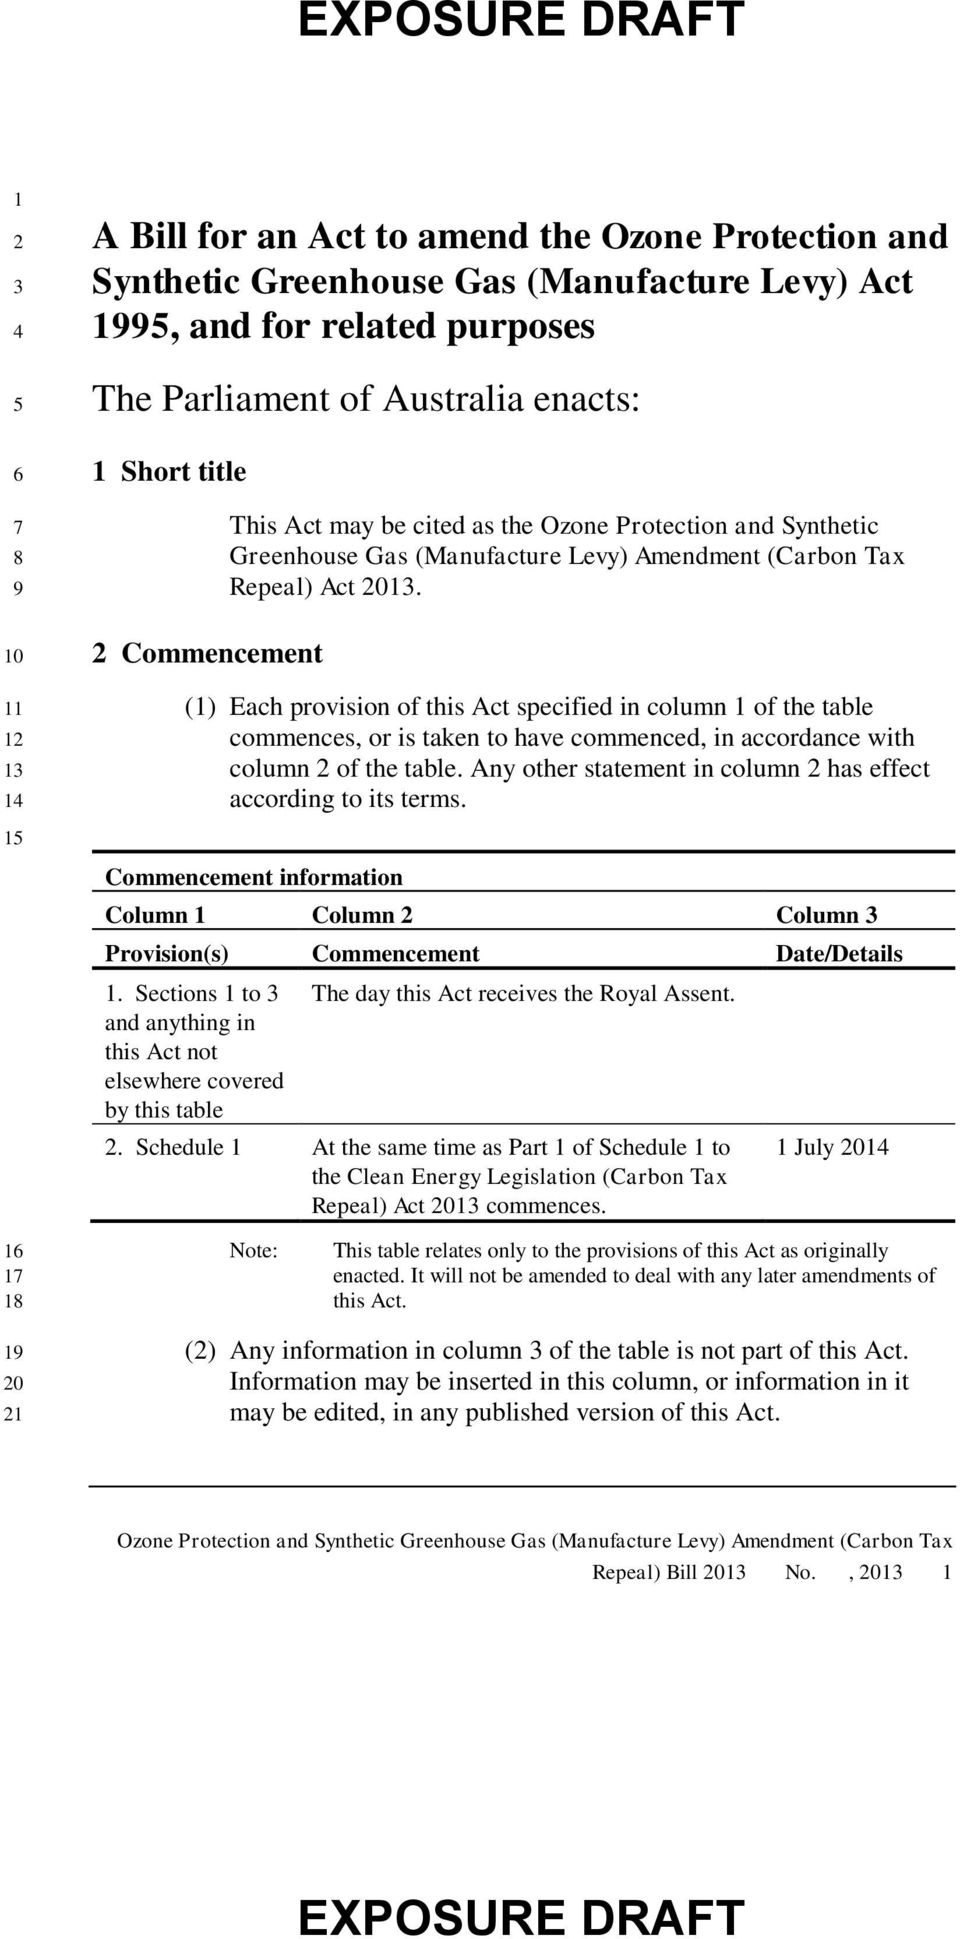 (1) Each provision of this Act specified in column 1 of the table commences, or is taken to have commenced, in accordance with column 2 of the table.